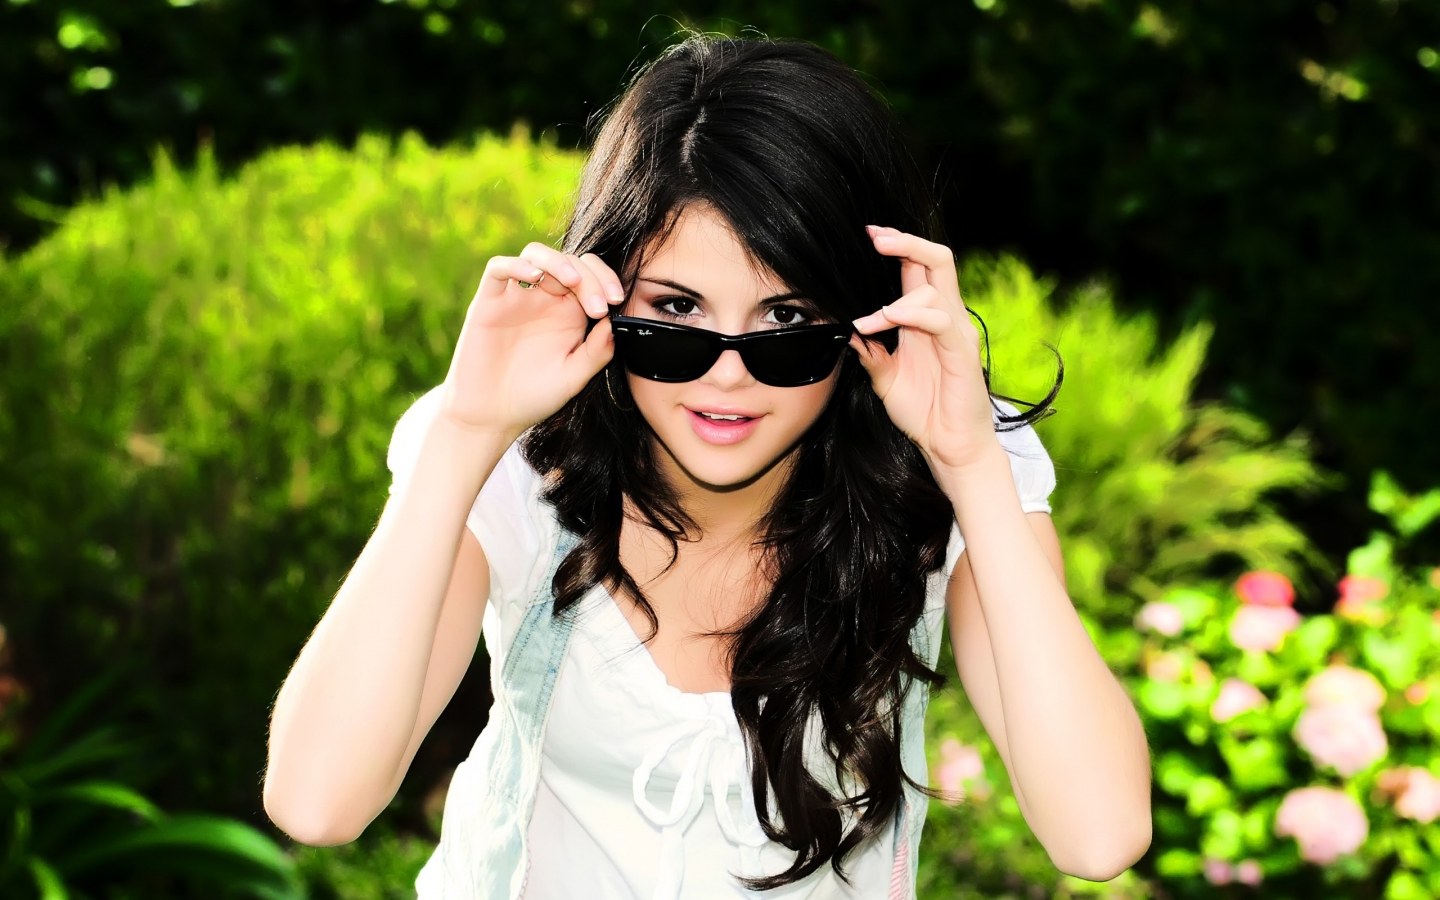 Cool Selena Gomez for 1440 x 900 widescreen resolution